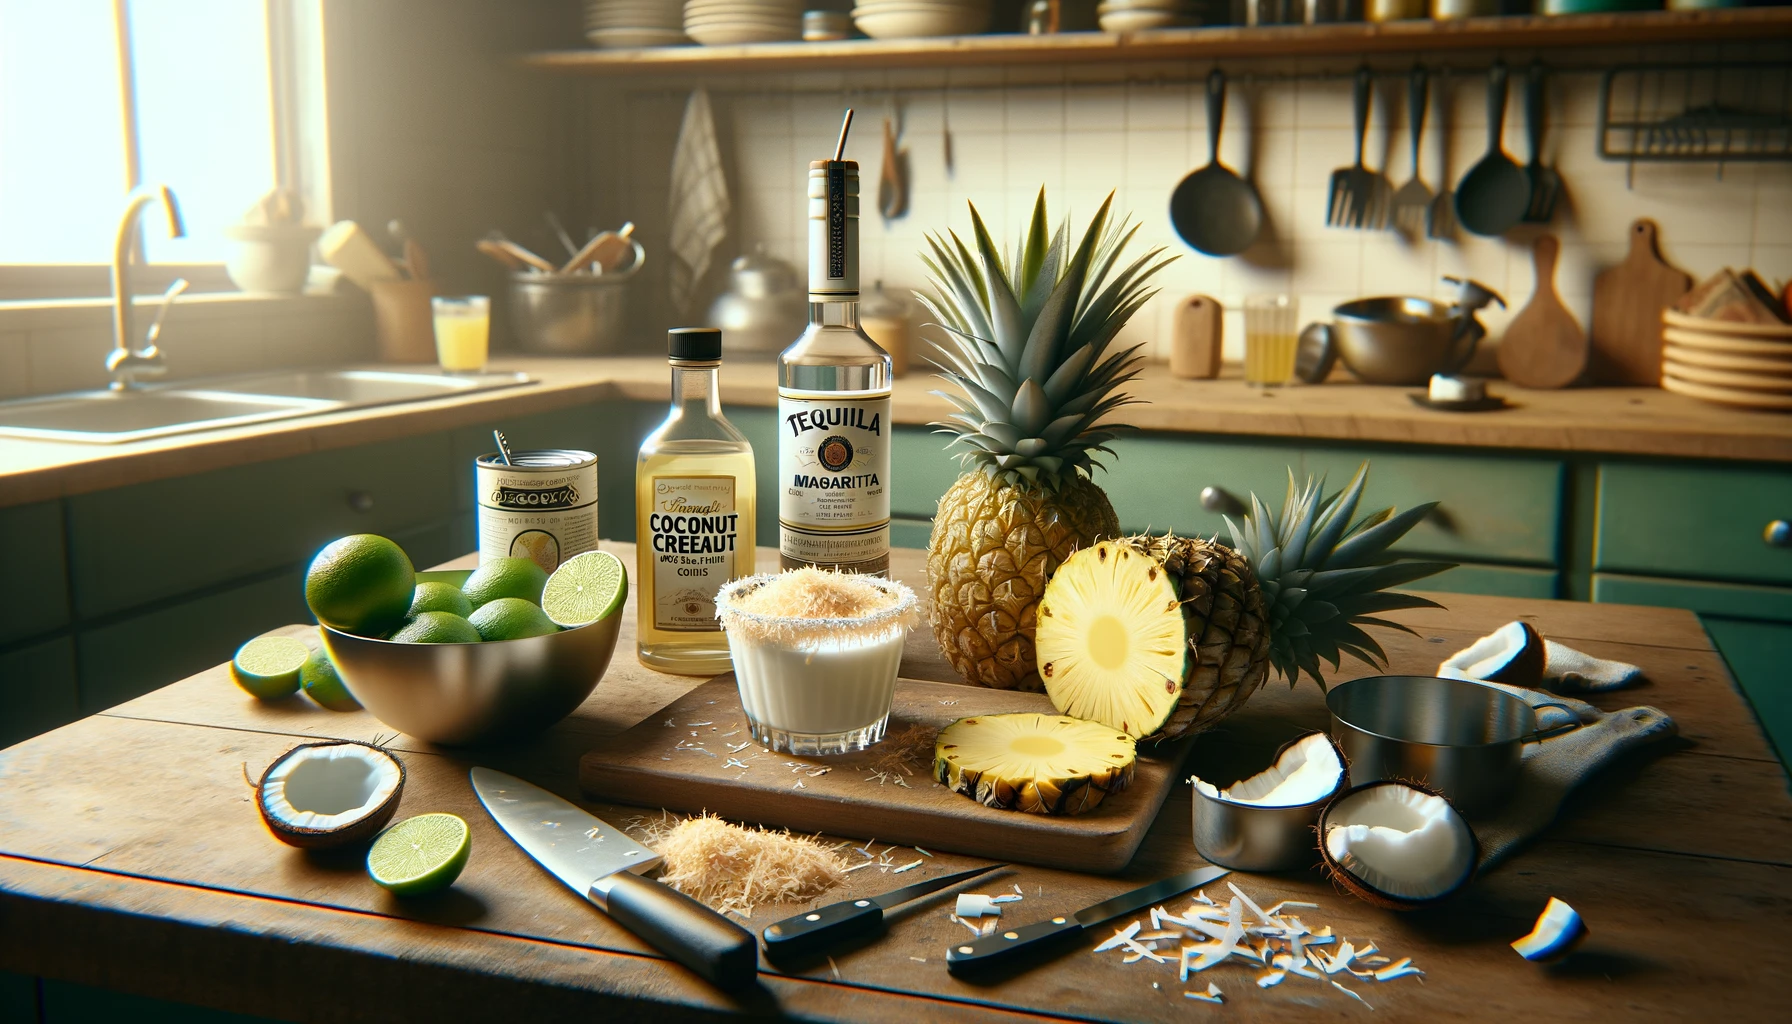 Ingredients for making Pineapple Coconut Margarita including fresh pineapple and coconut cream